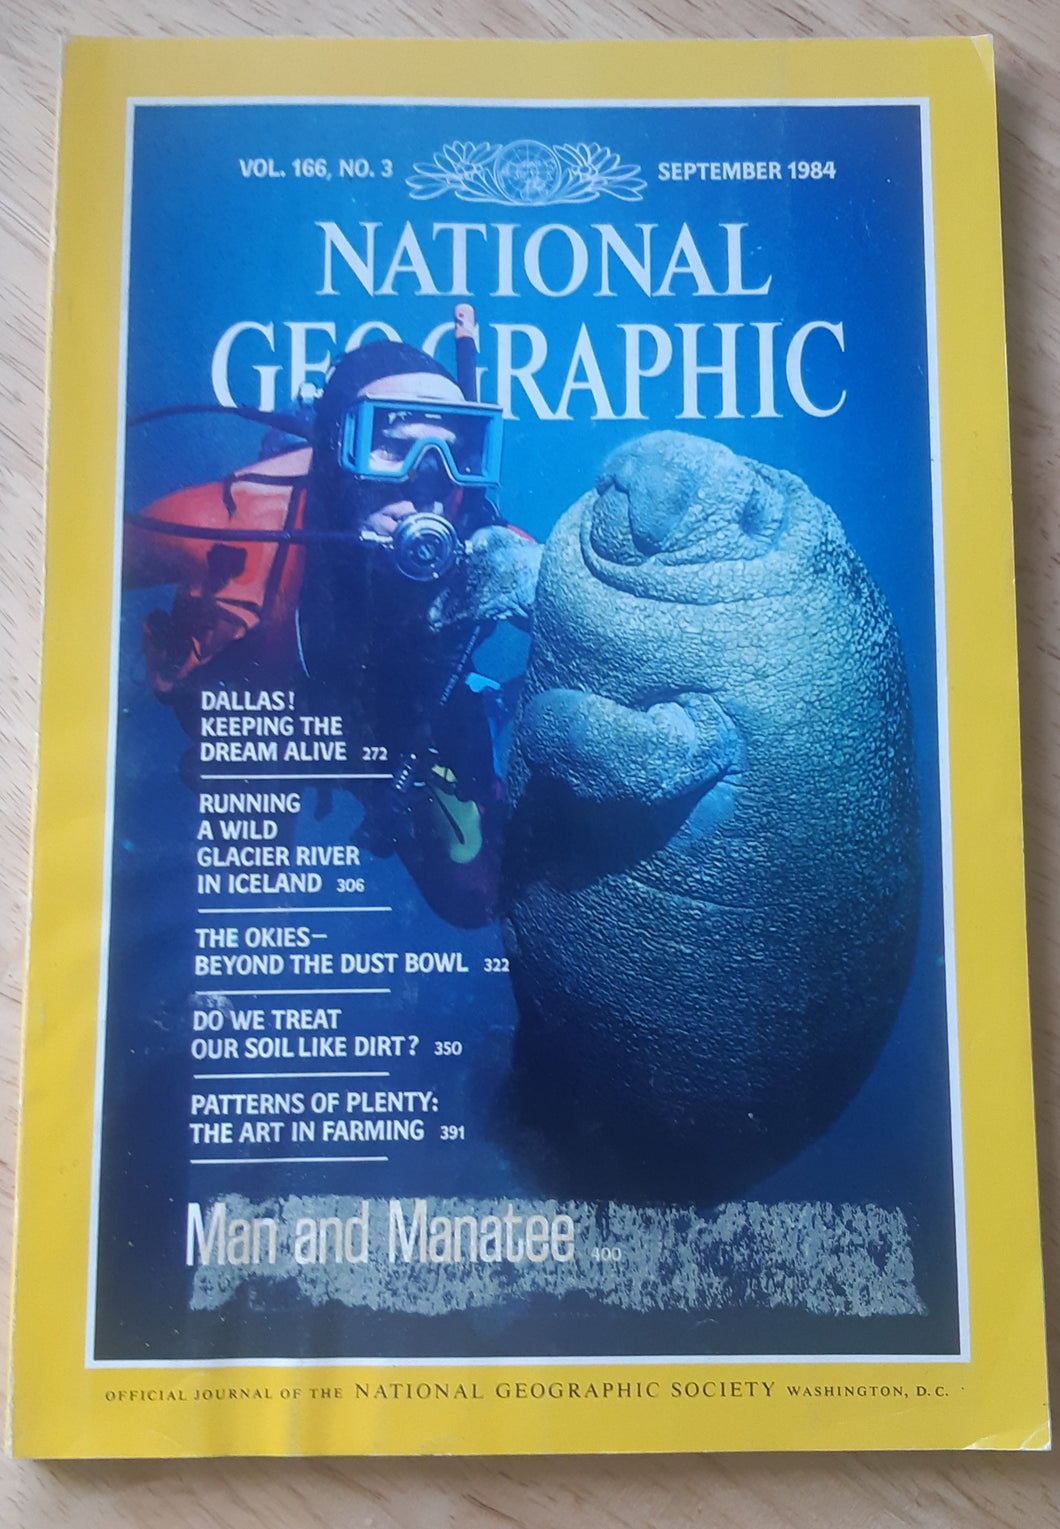 National Geographic - September 1984 (Vol. 166, No. 3)